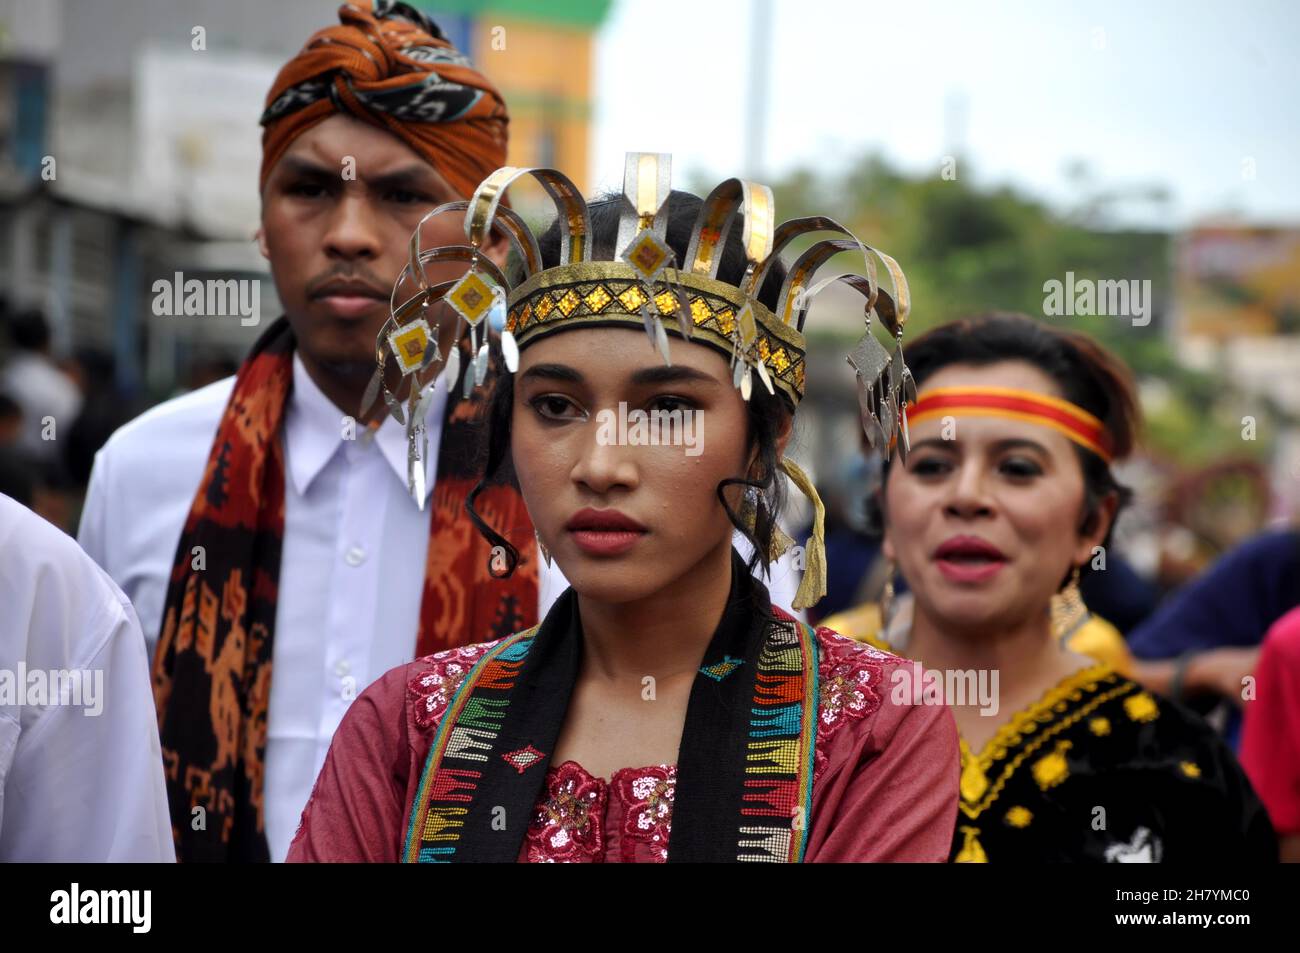 Jakarta, Indonesia - March 4, 2018 : A group from the province of East Nusa Tenggara in their traditional clothes joins the cultural carnival event in Stock Photo